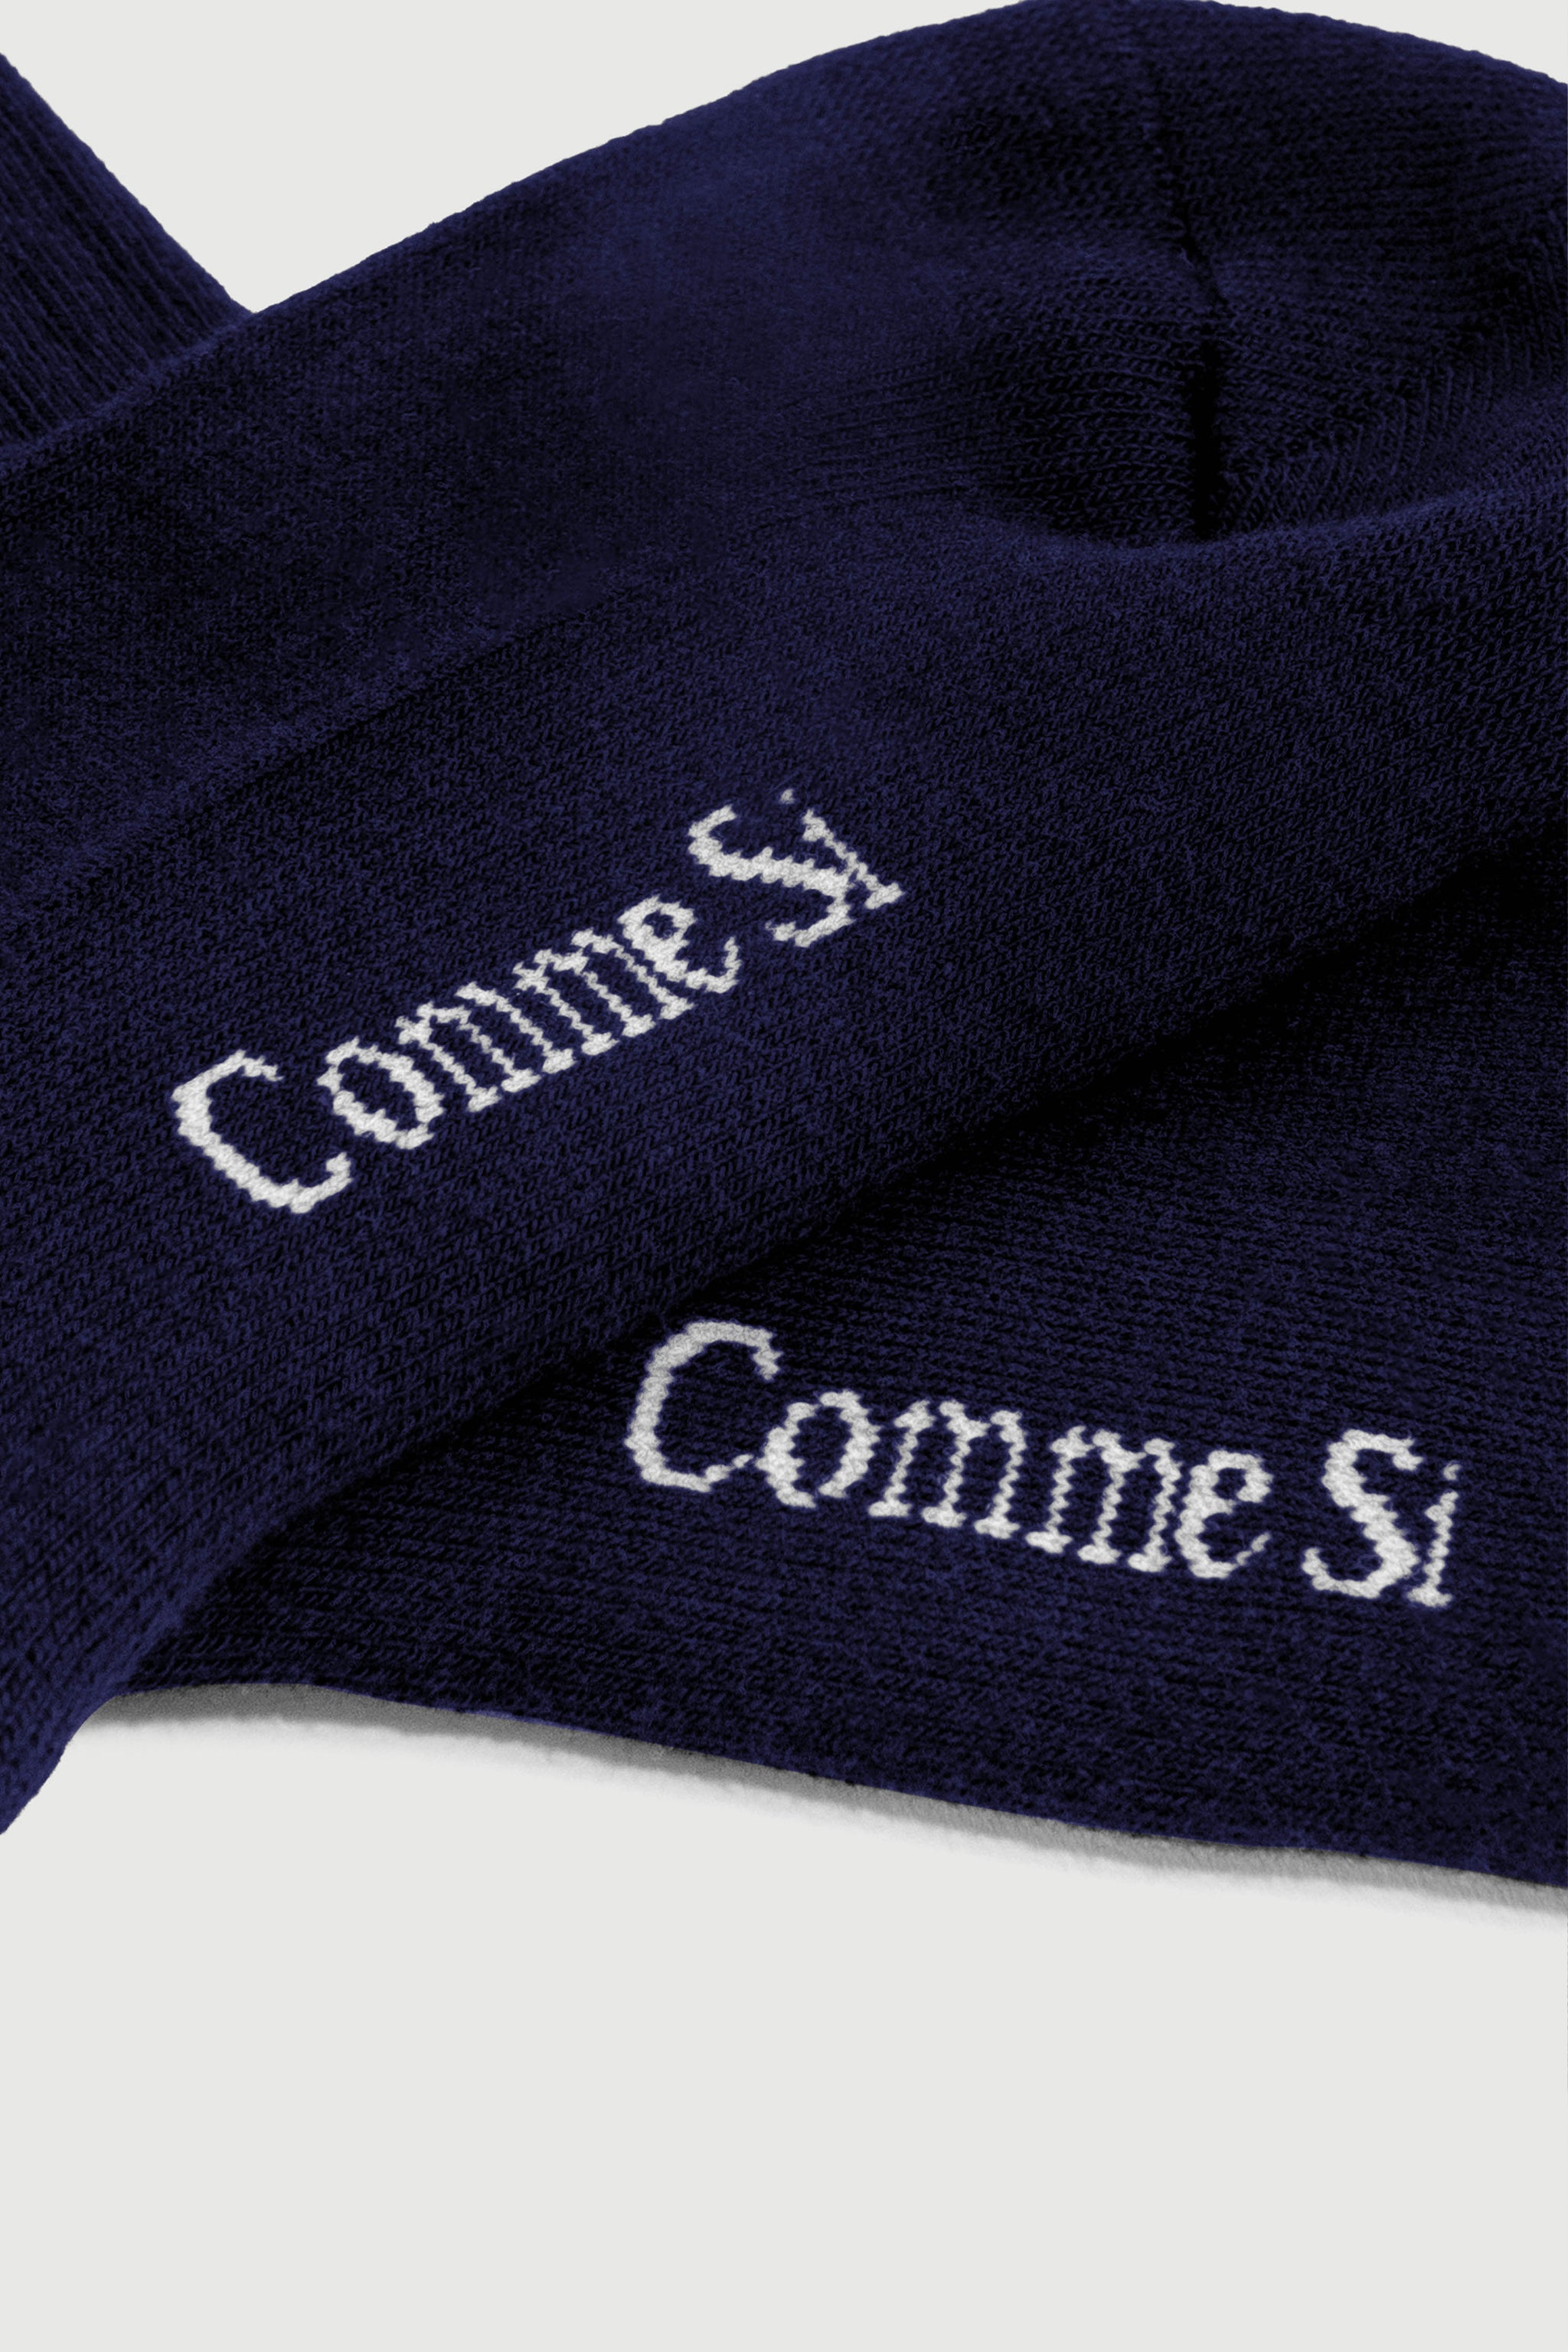 Footbed detail, The Everyday Sock in Navy, GOTS certified Organic Cotton, by Comme Si